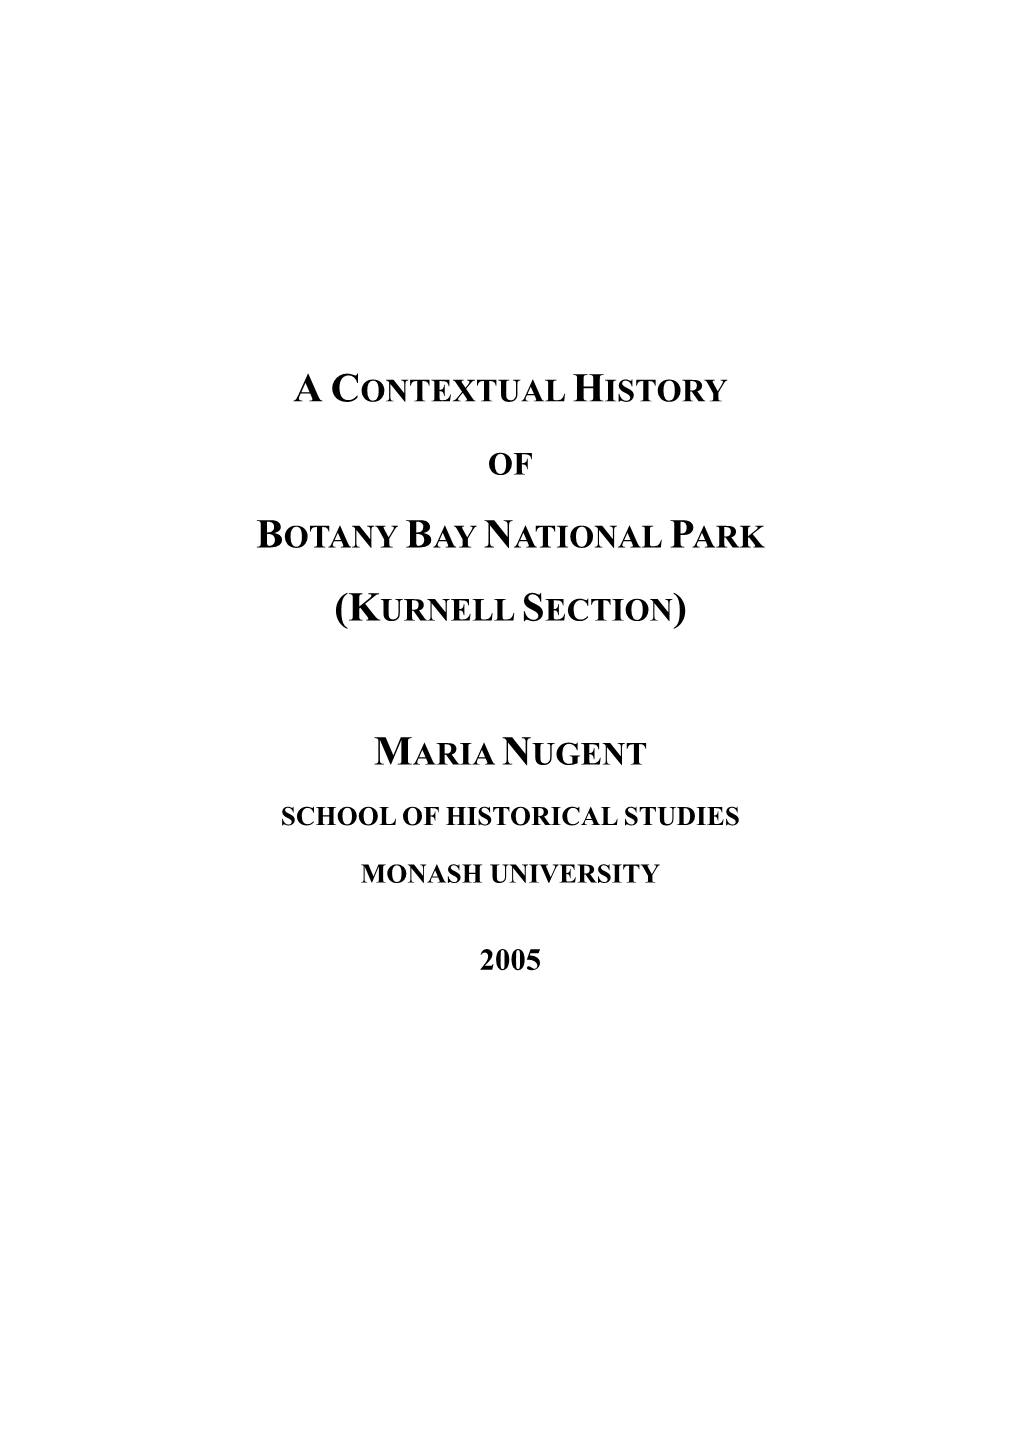 A Contextual History of Botany Bay National Park (Kurnell Section) · Maria Nugent 2005 1